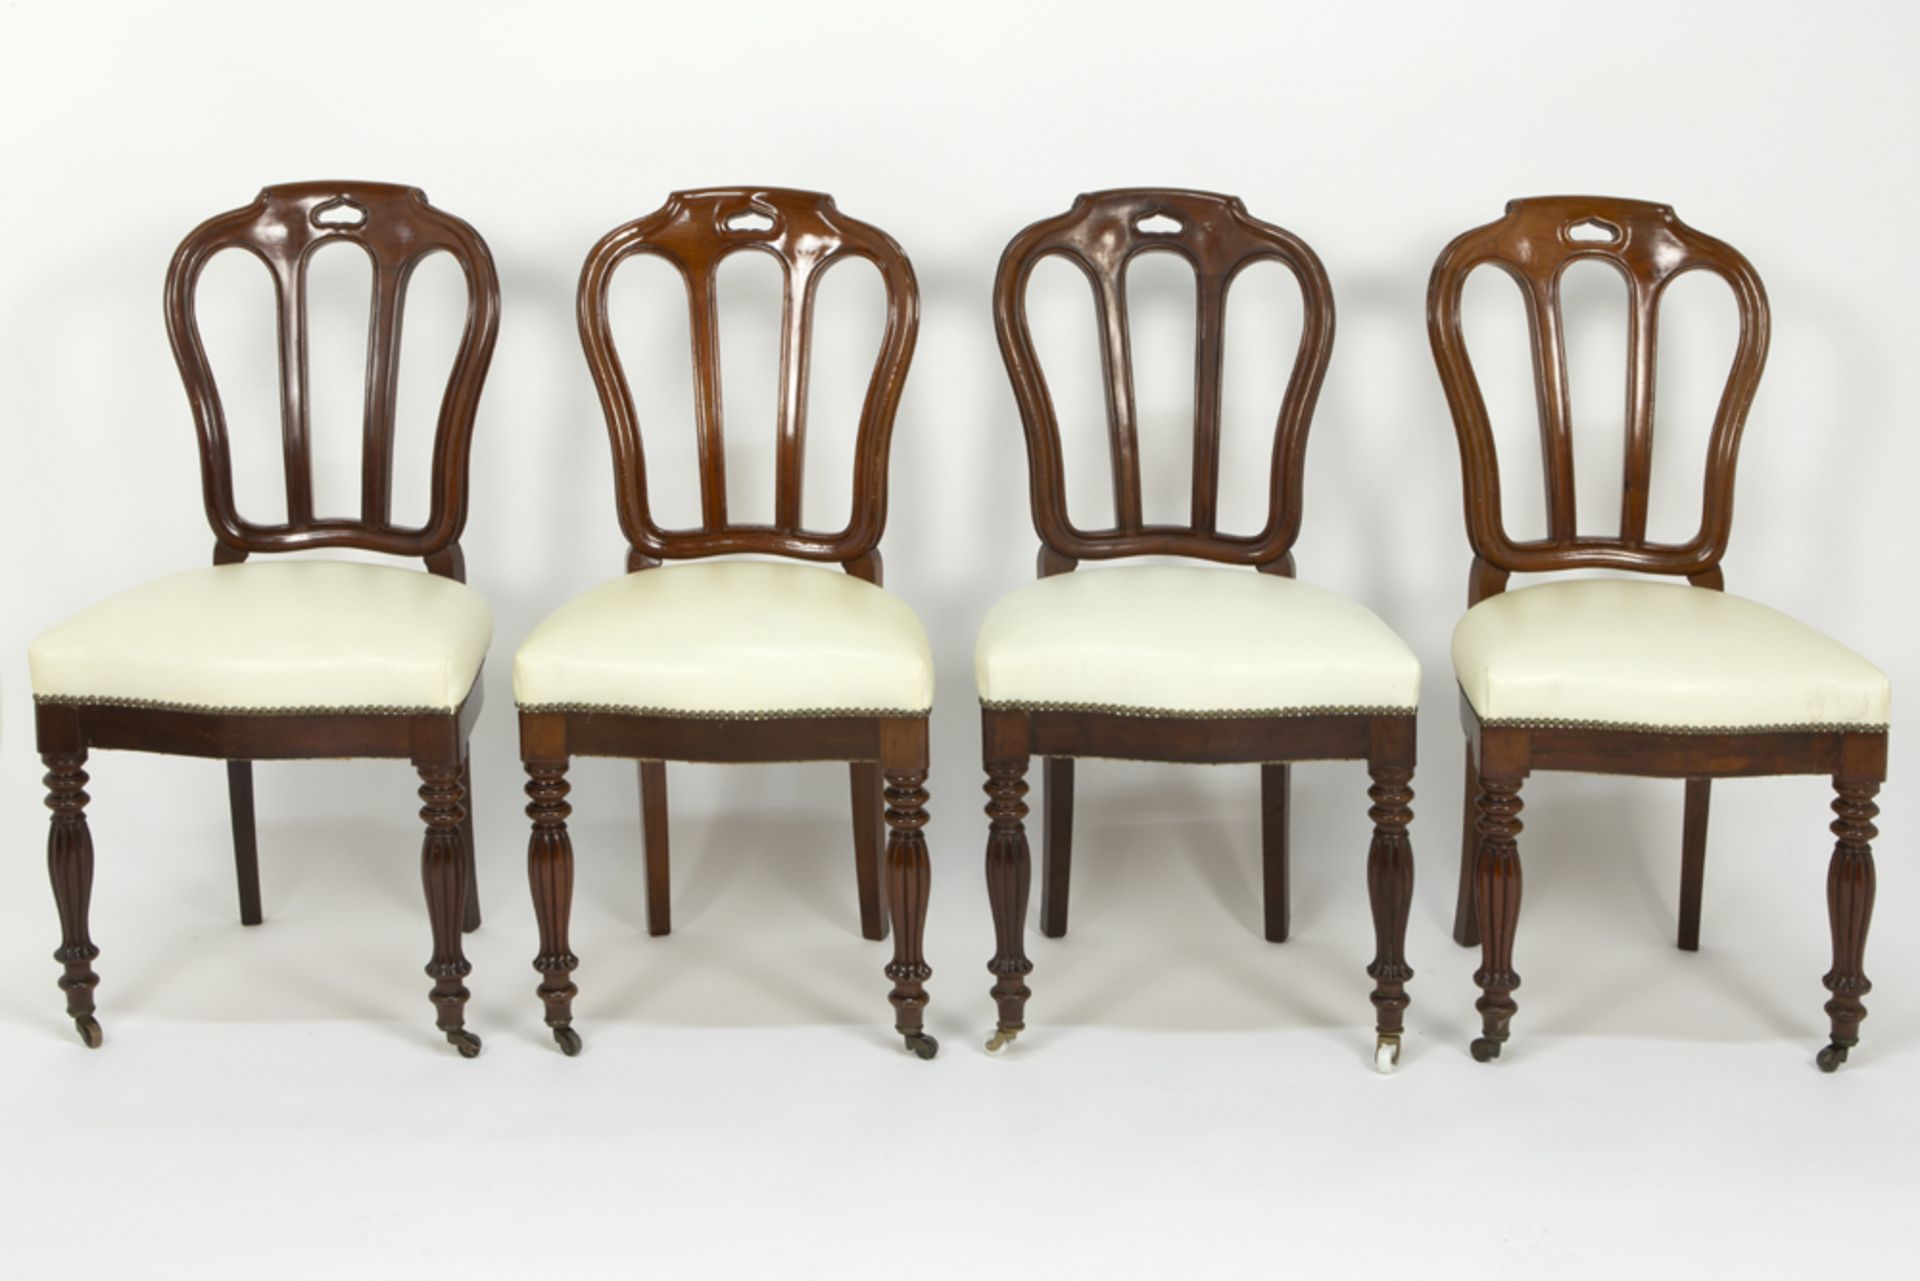 rare series of sixteen 19th Cent. chairs with an elegant design in mahogany - all completely - Image 5 of 6